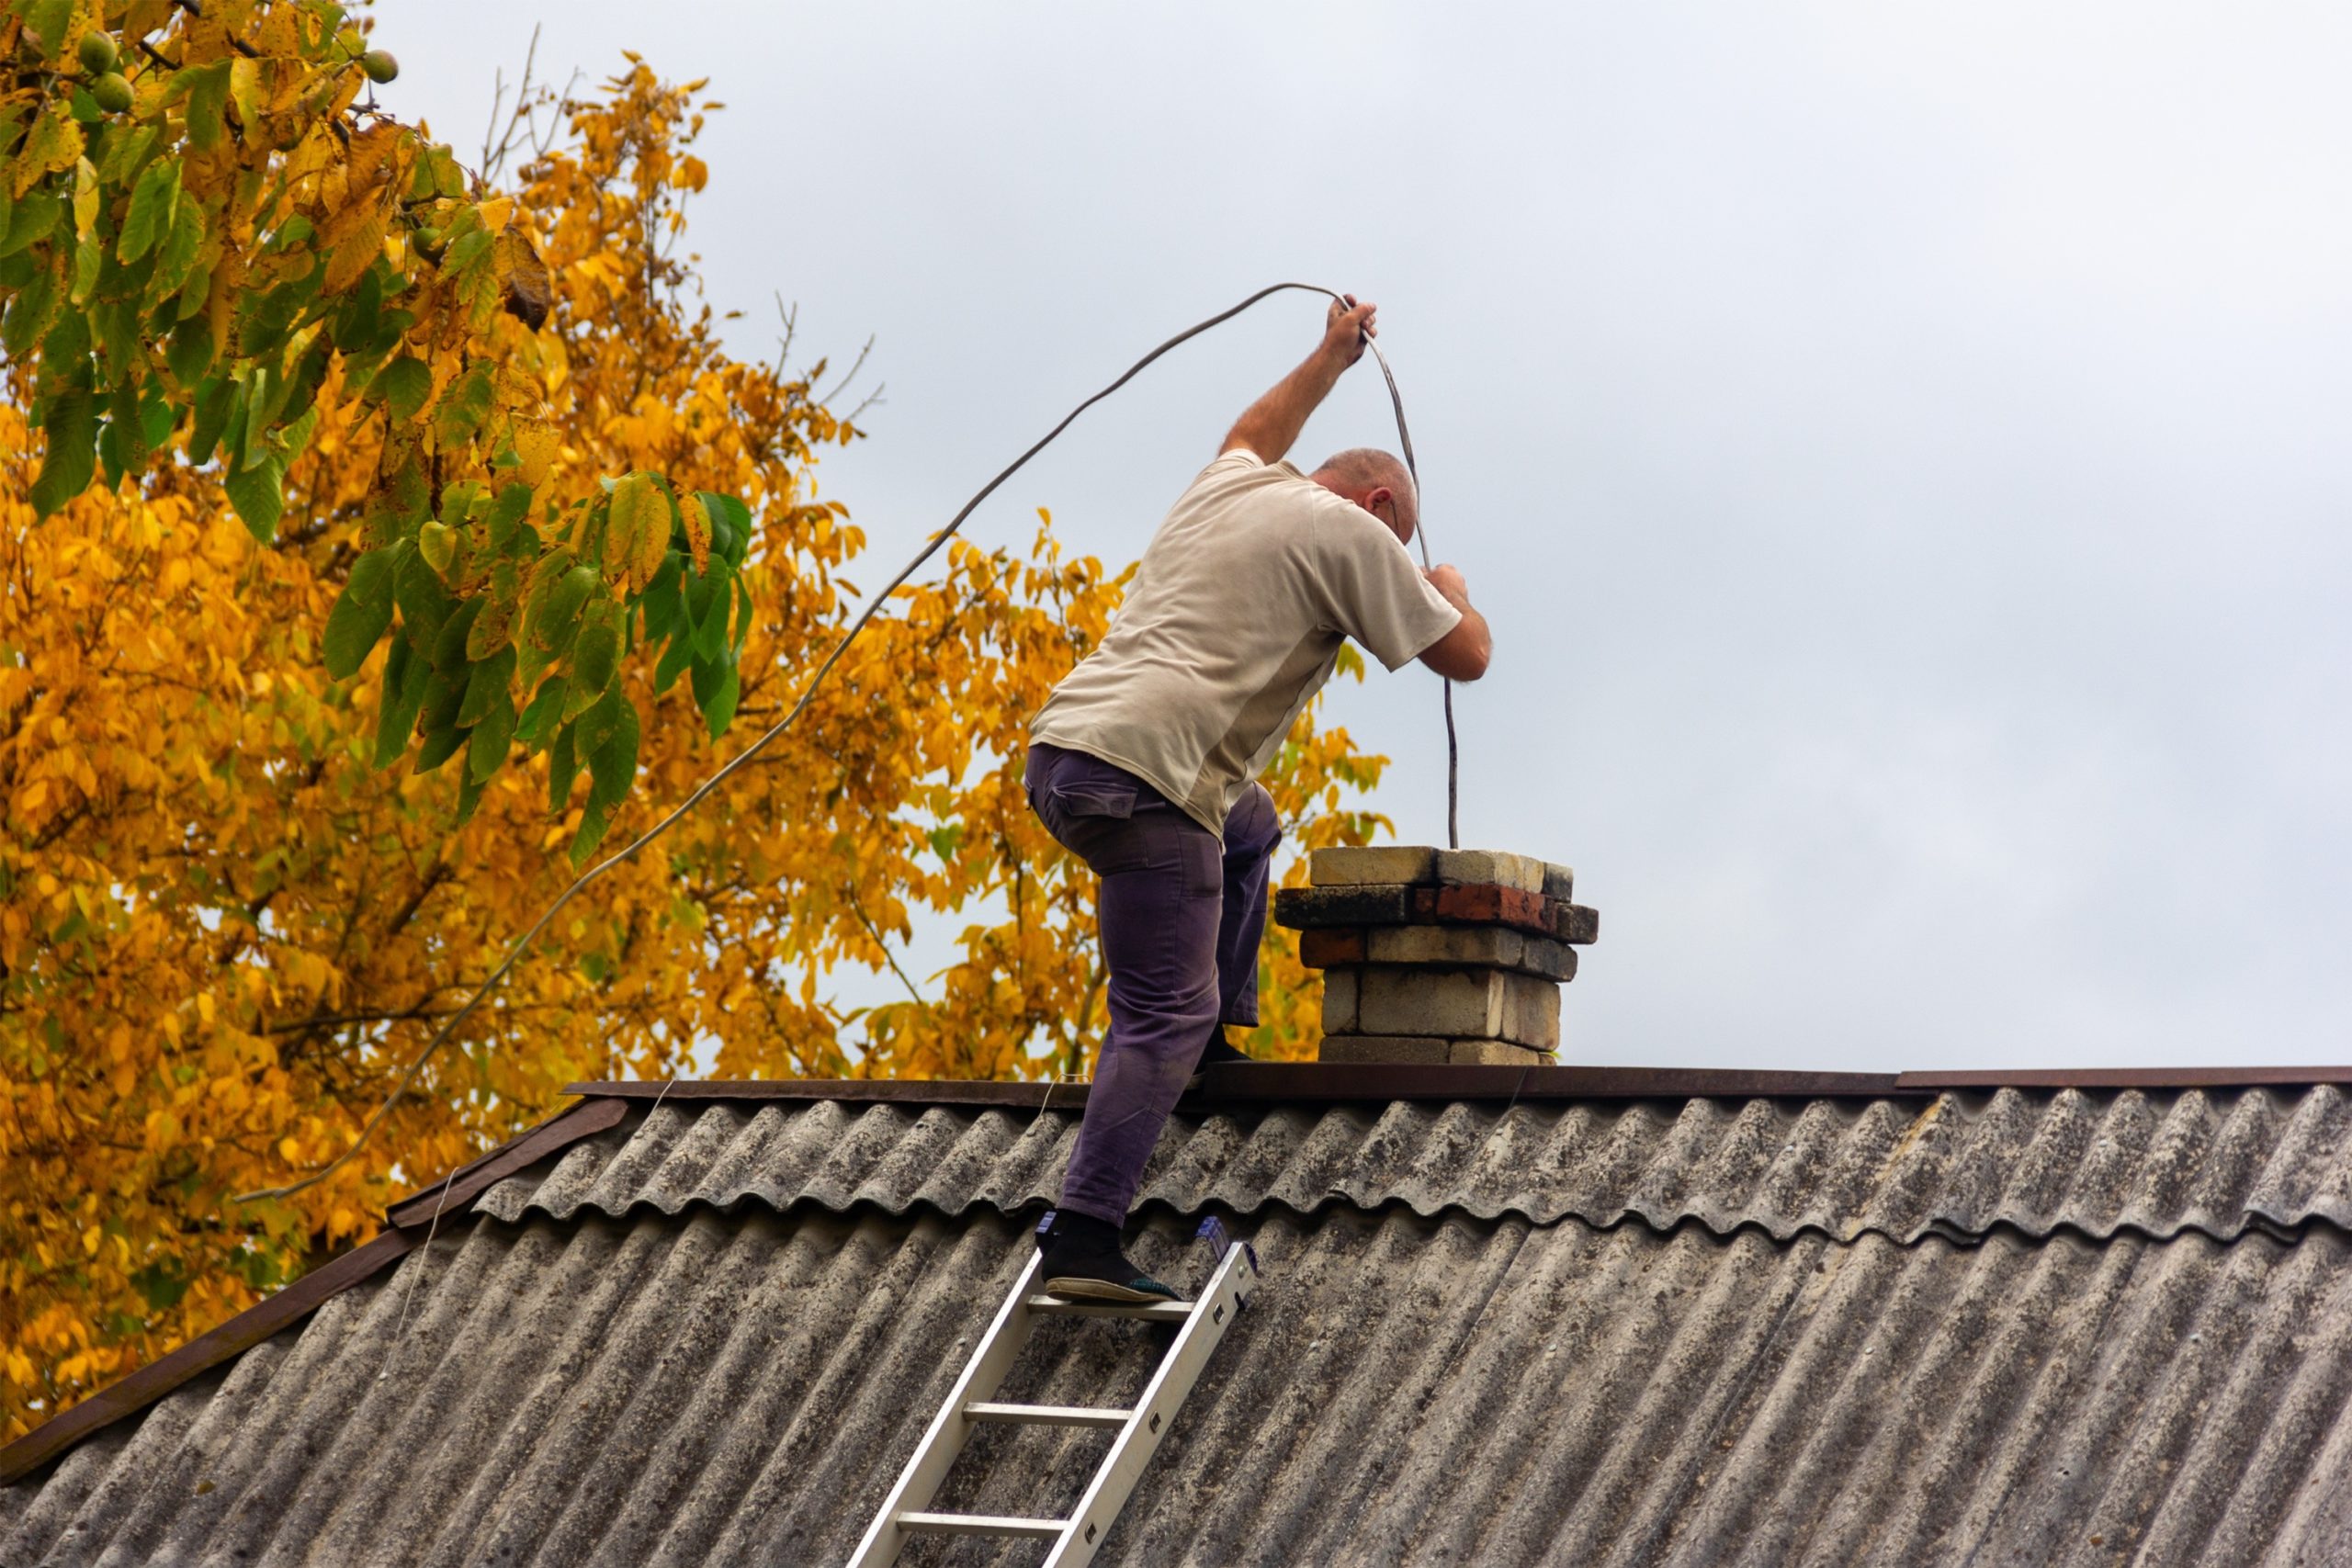 Schedule your chimney sweep before this fall